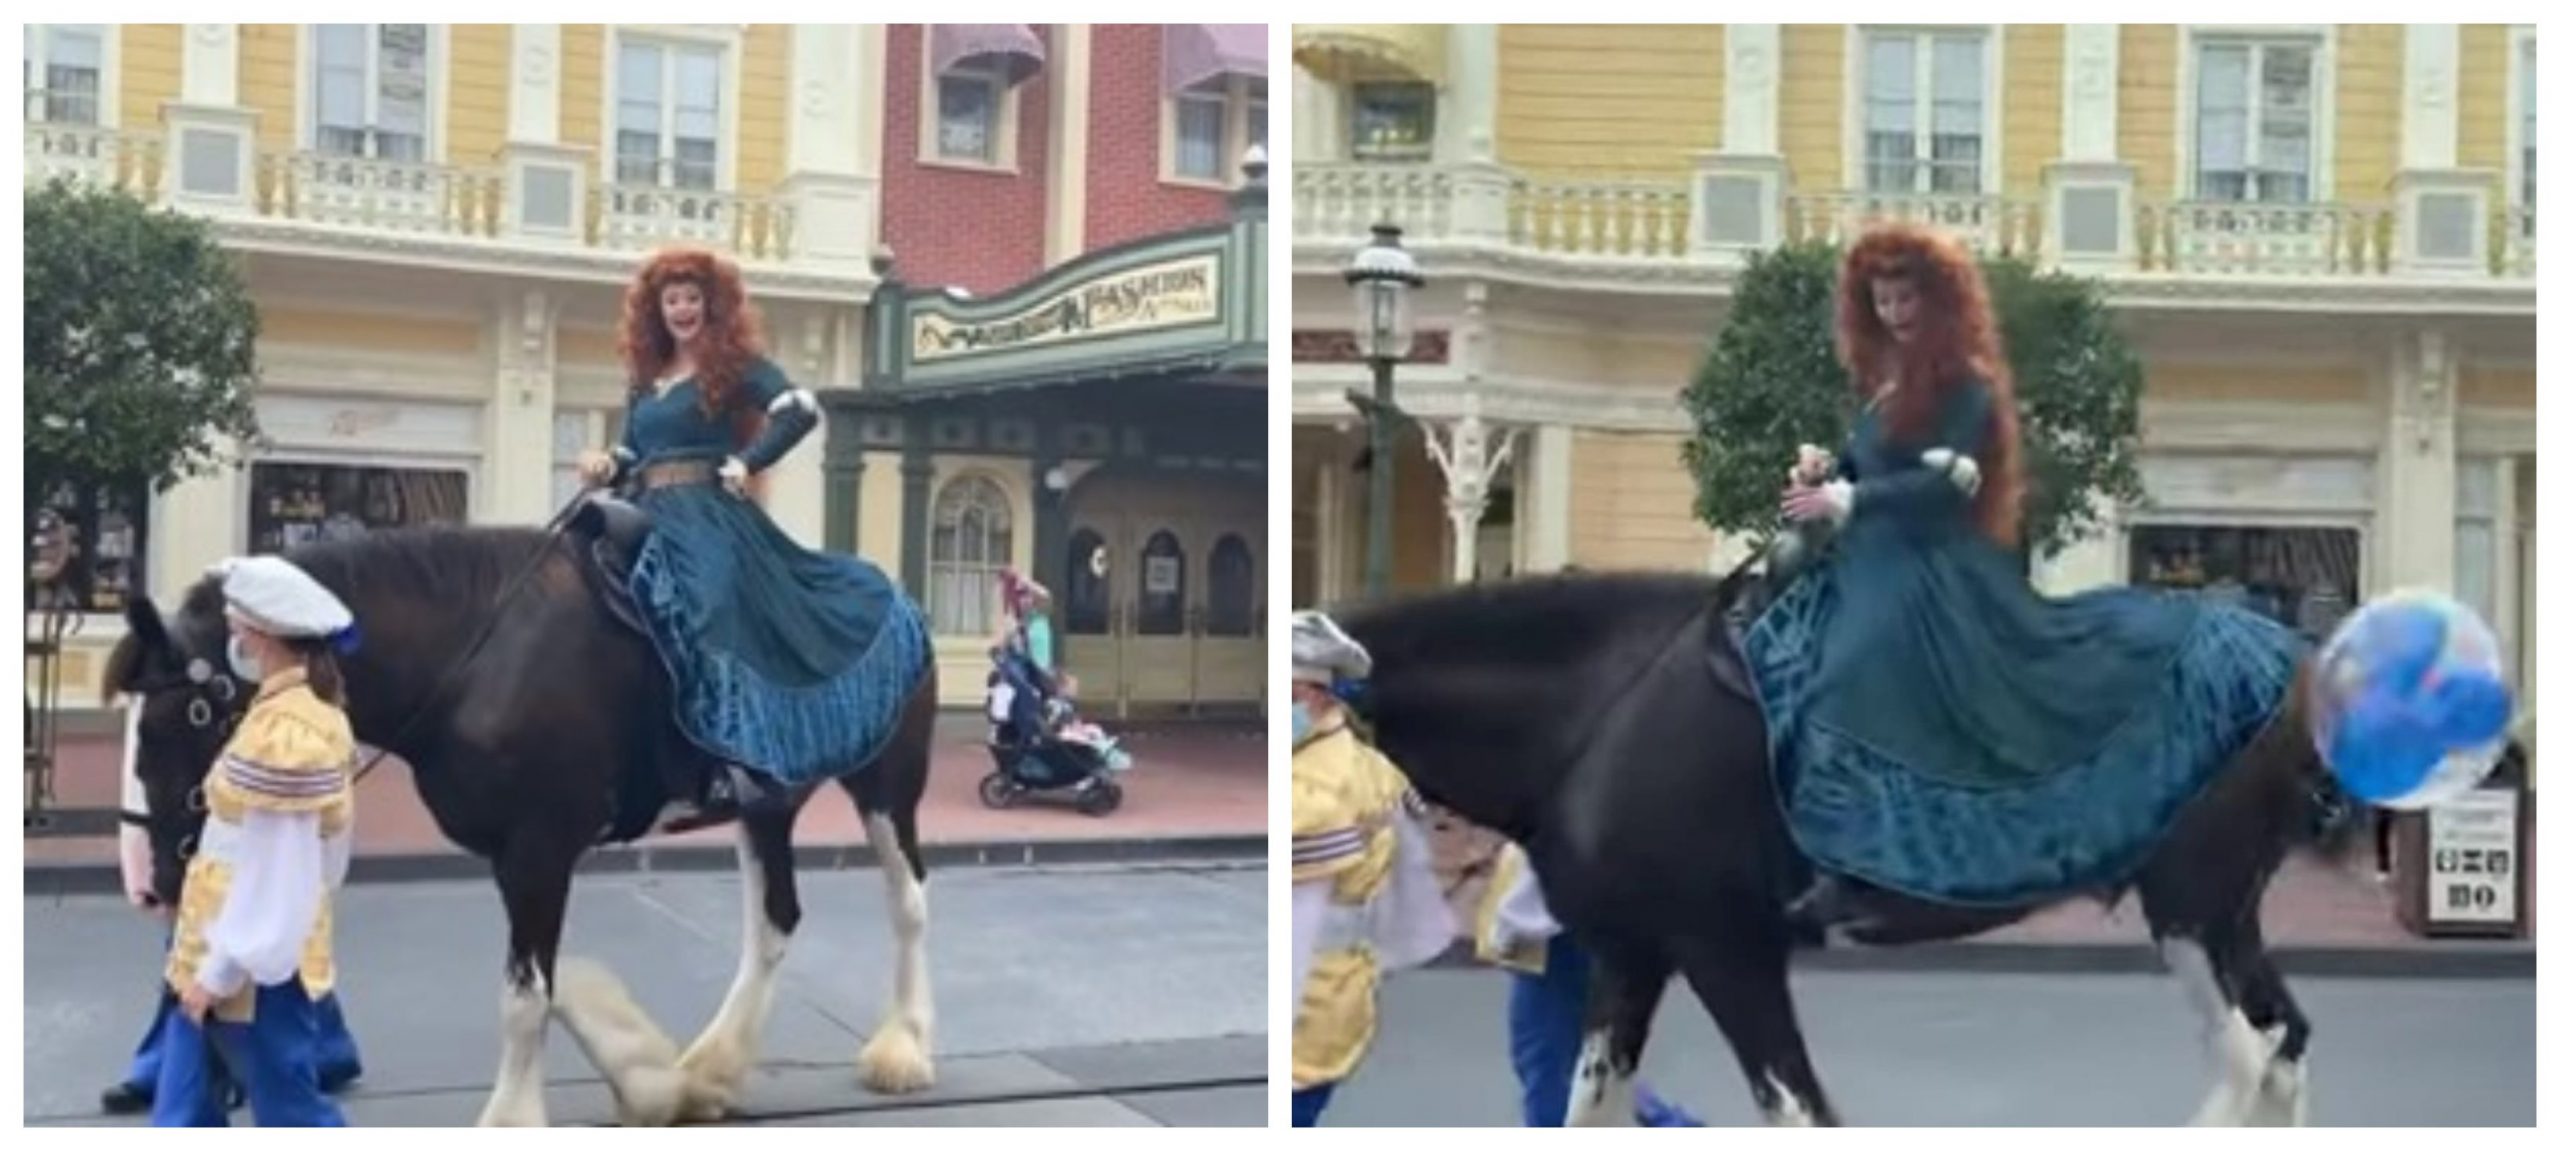 Merida’s Horse Gets Spooked During The Royal Princess Processional